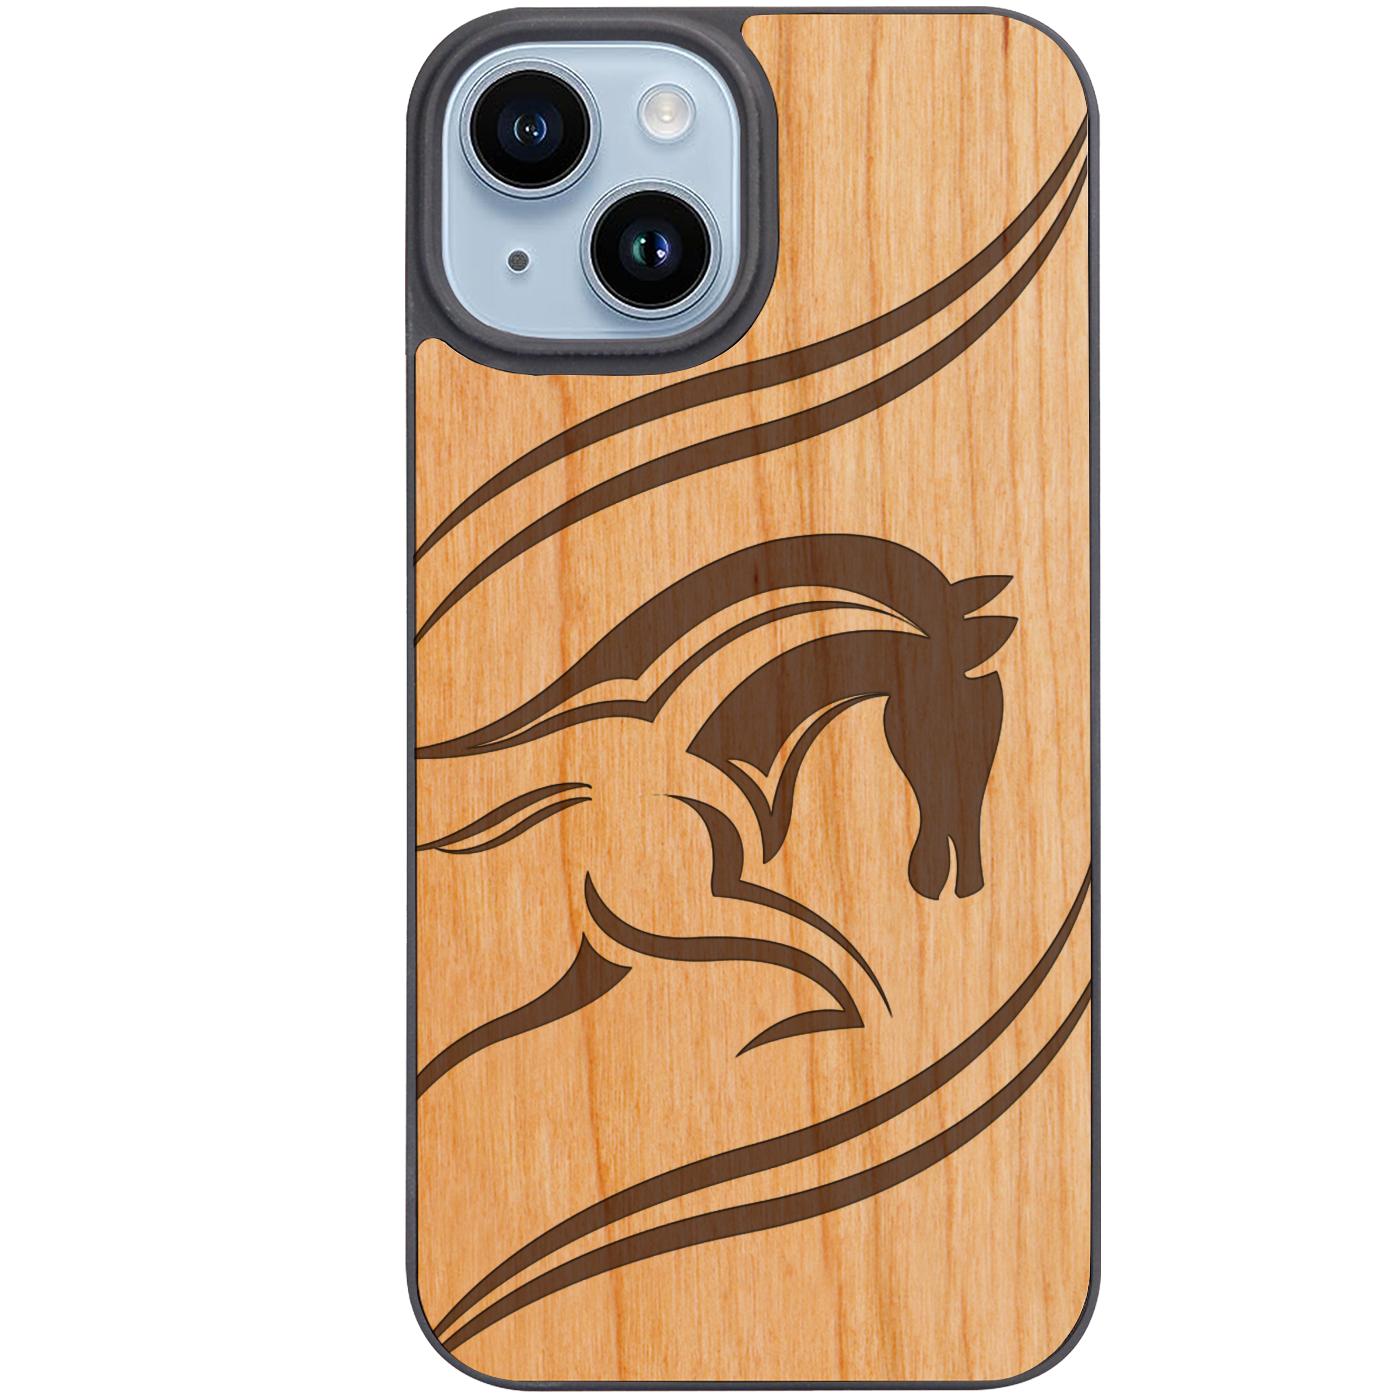 Racing Horse - Engraved Phone Case